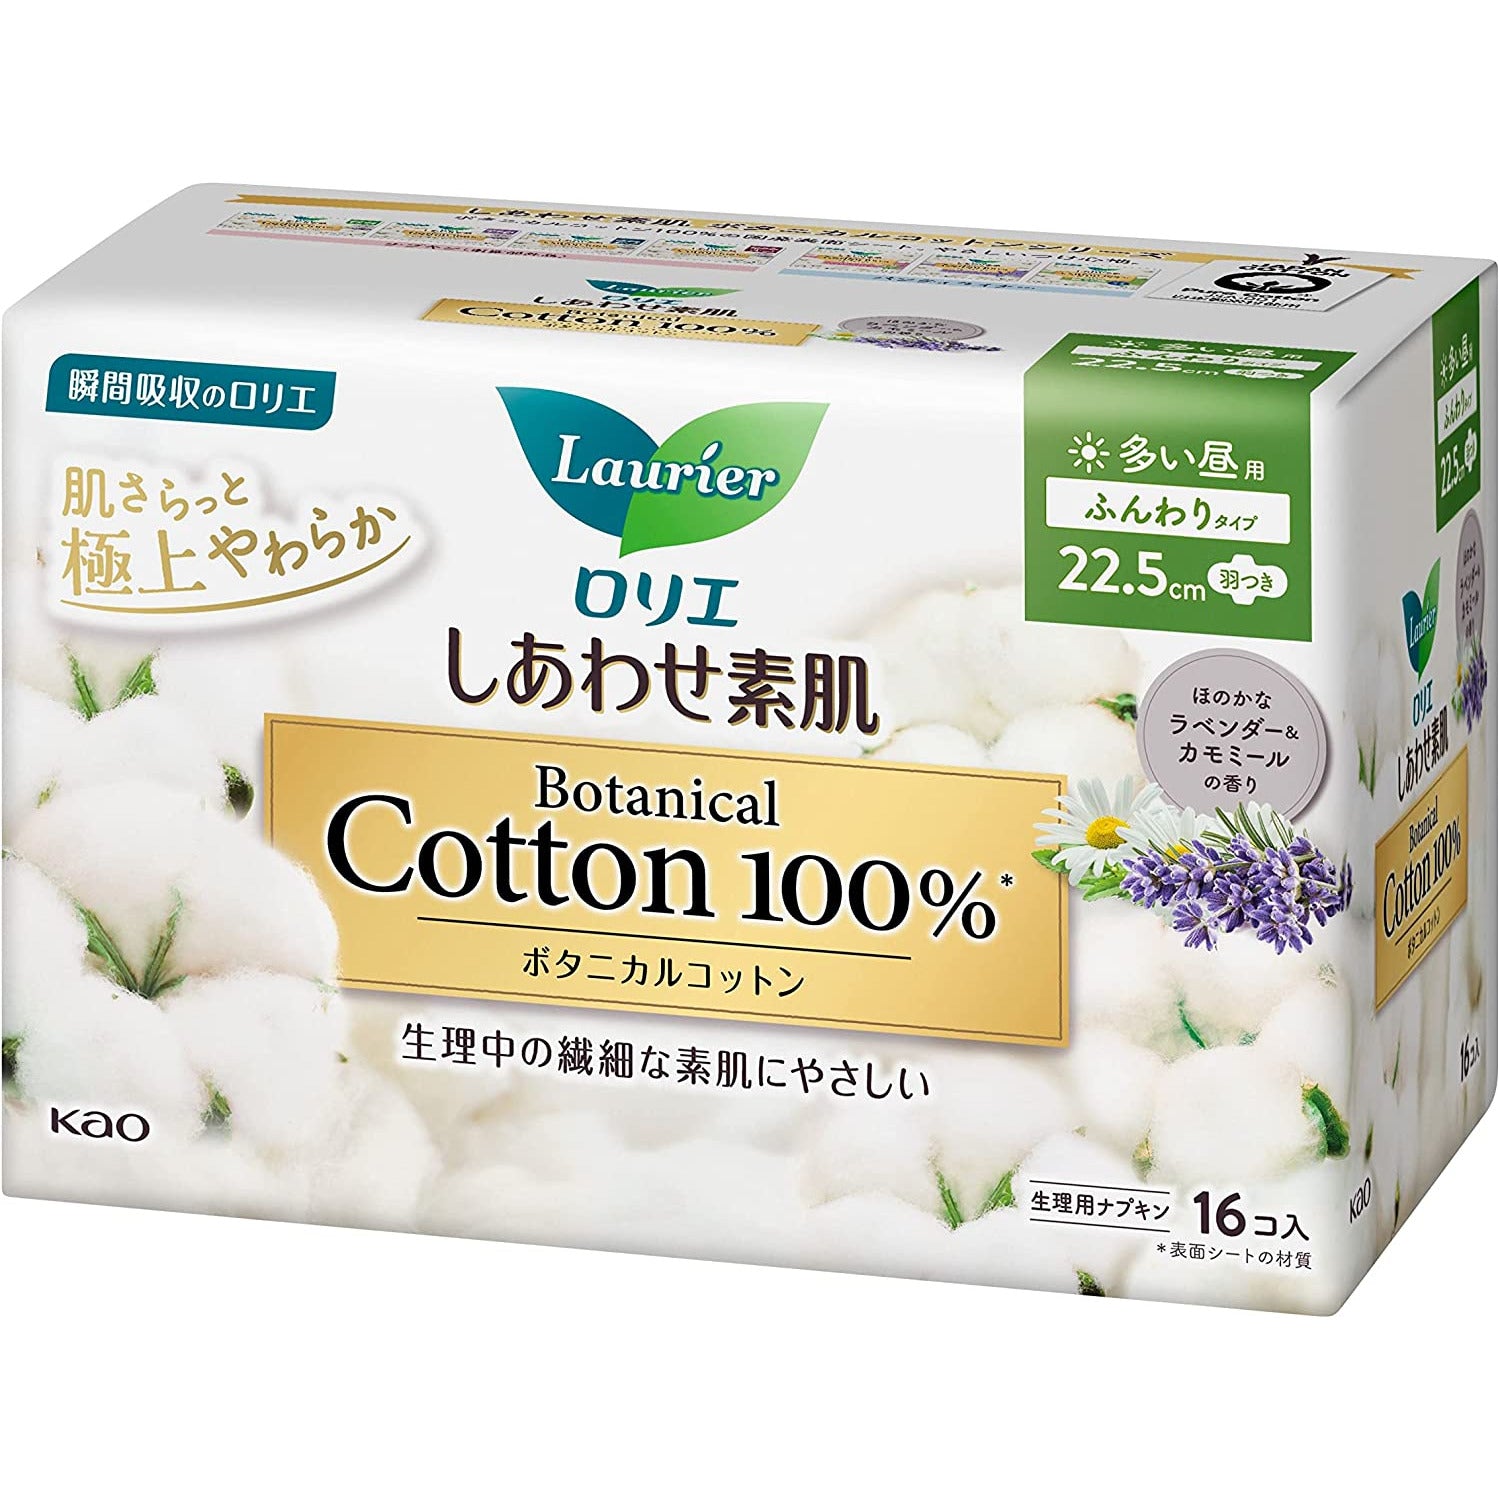 Kao Laurier Shiawase Bare Skin Botanical Cotton 100% Napkin 22.5 cm for daytime use with wings 16 pieces